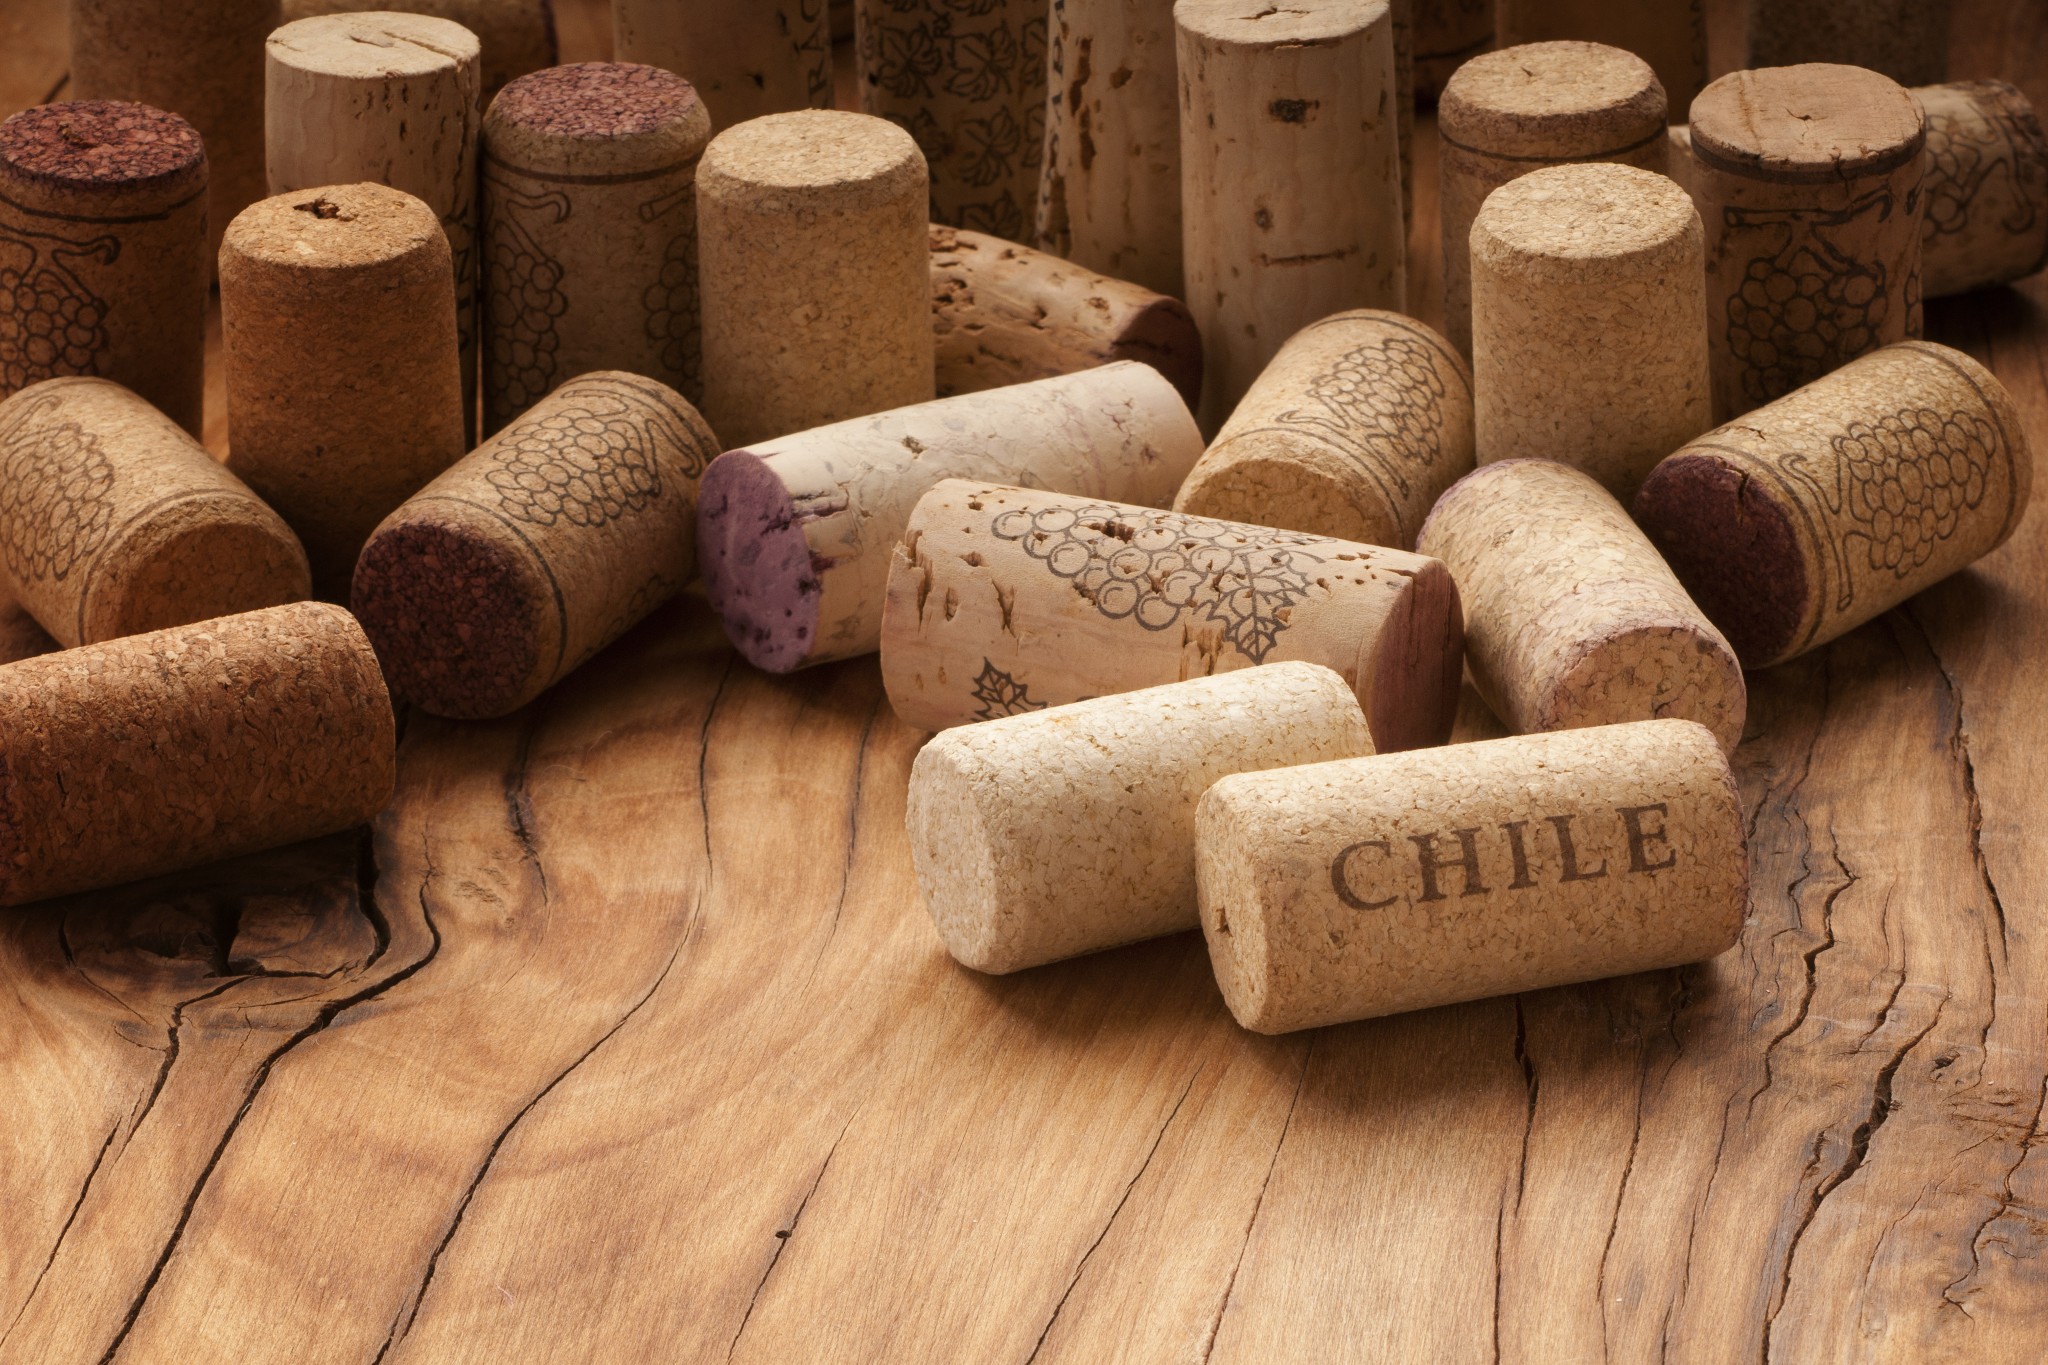 Chilean Wine Exports To China Surge 40% in Q1 2021 As Trade Eases